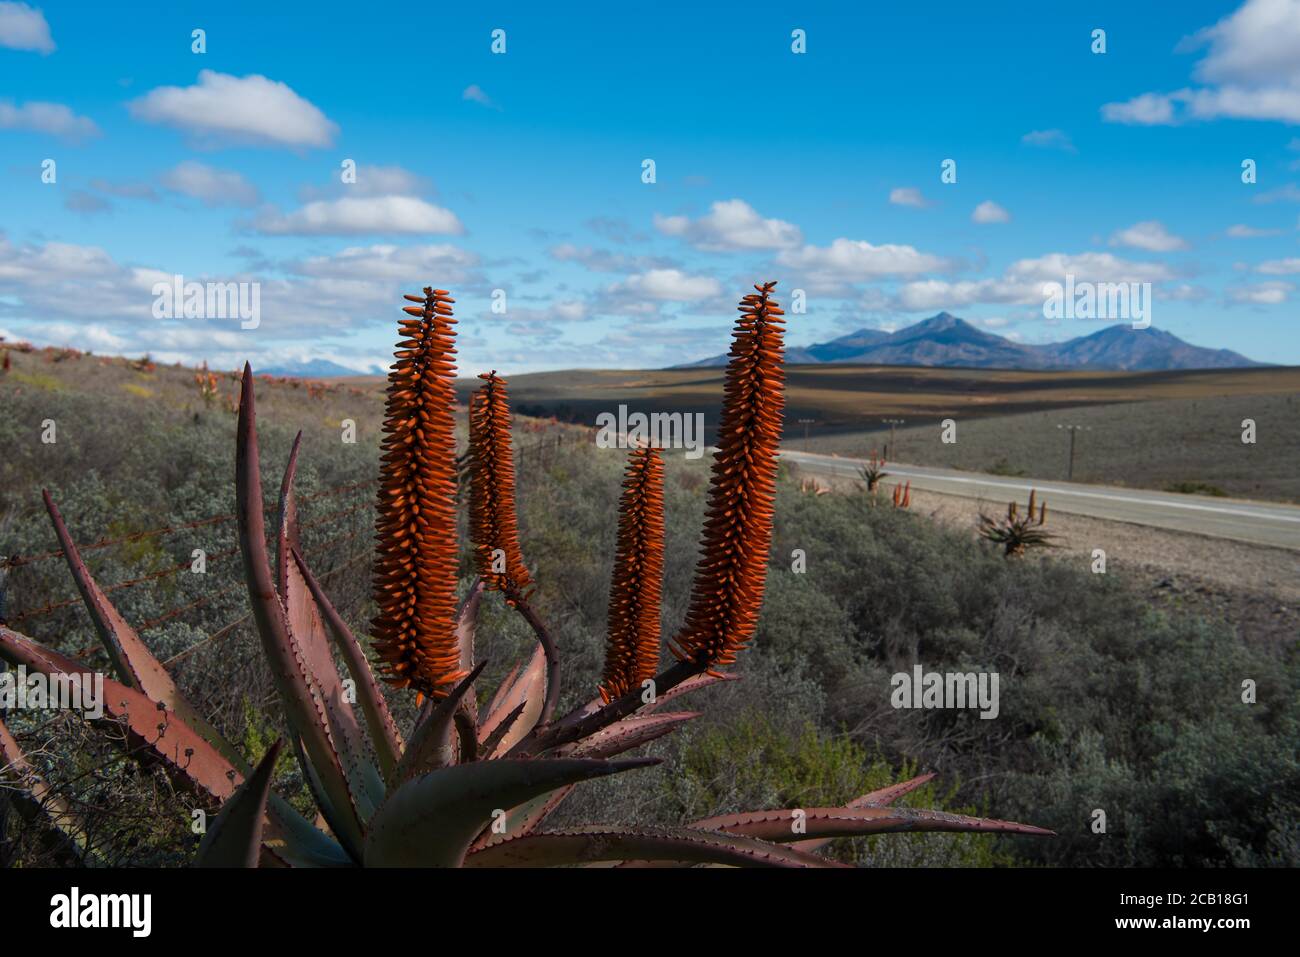 Aloe season in the Karoo flowering displaying red blossoms and beautiful landscape Stock Photo